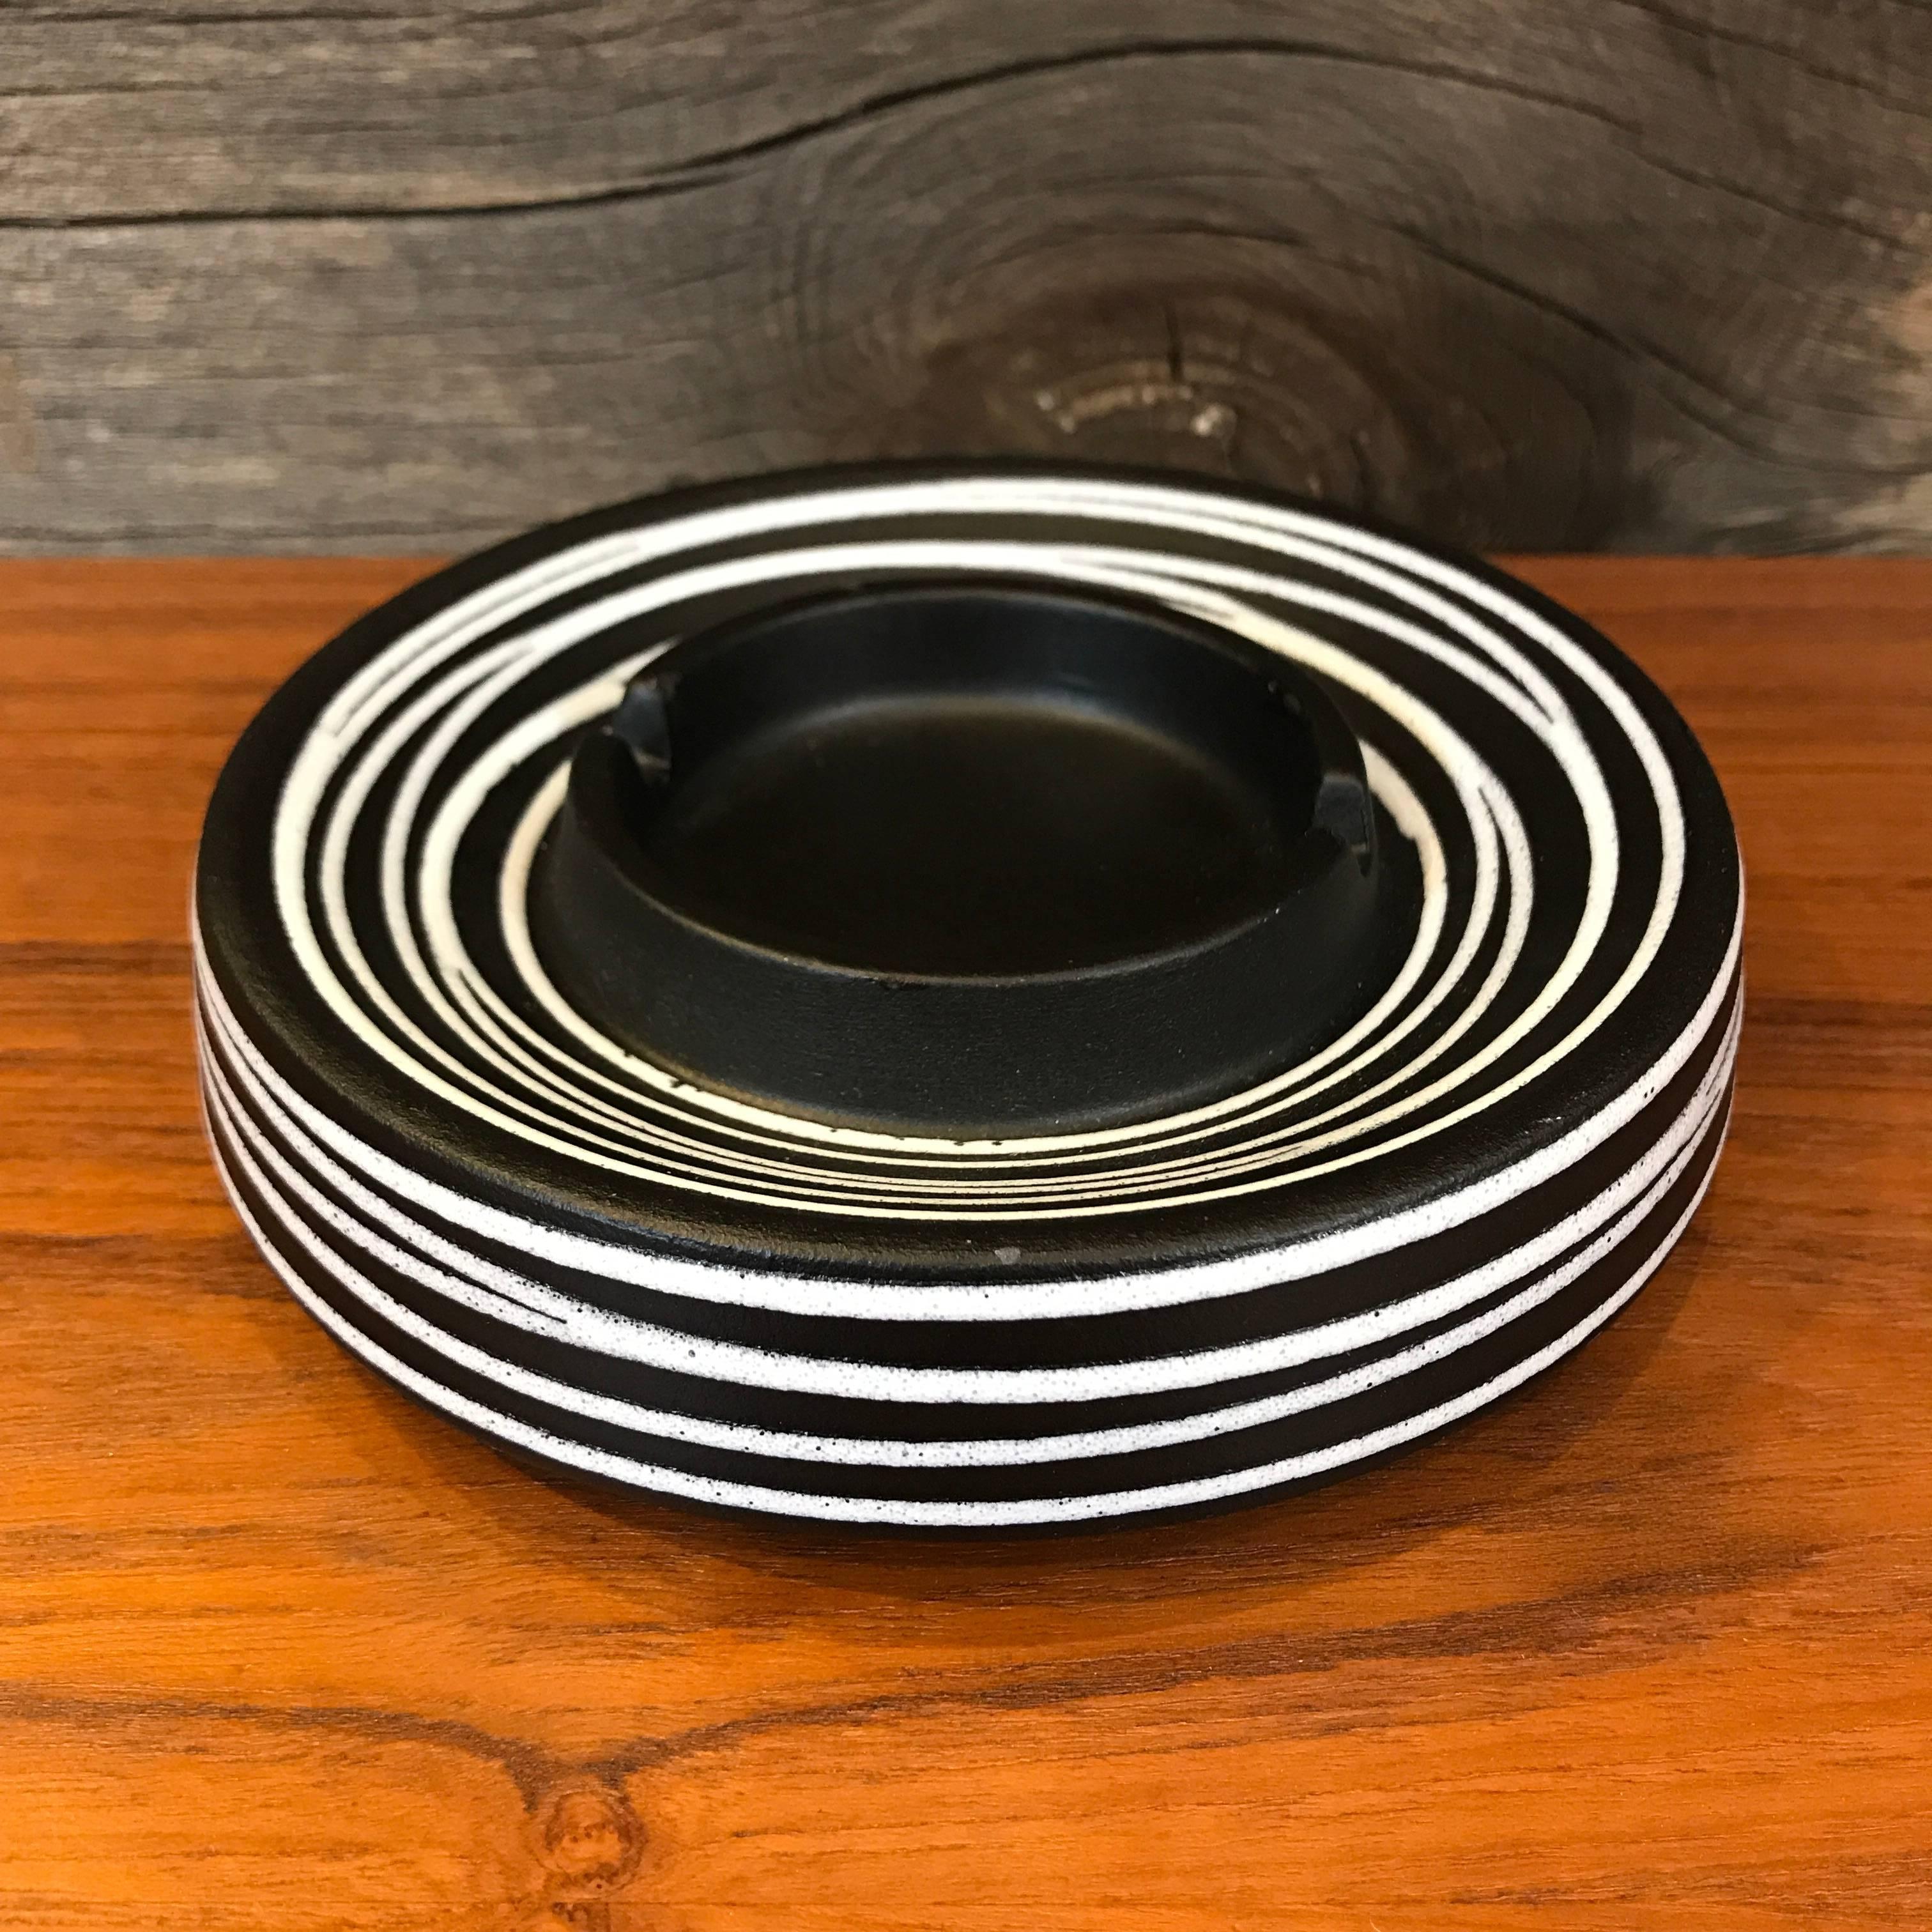 Vintage mod black and white ceramic ashtray, model number 2070, manufactured by Royal Haeger of Illinois.